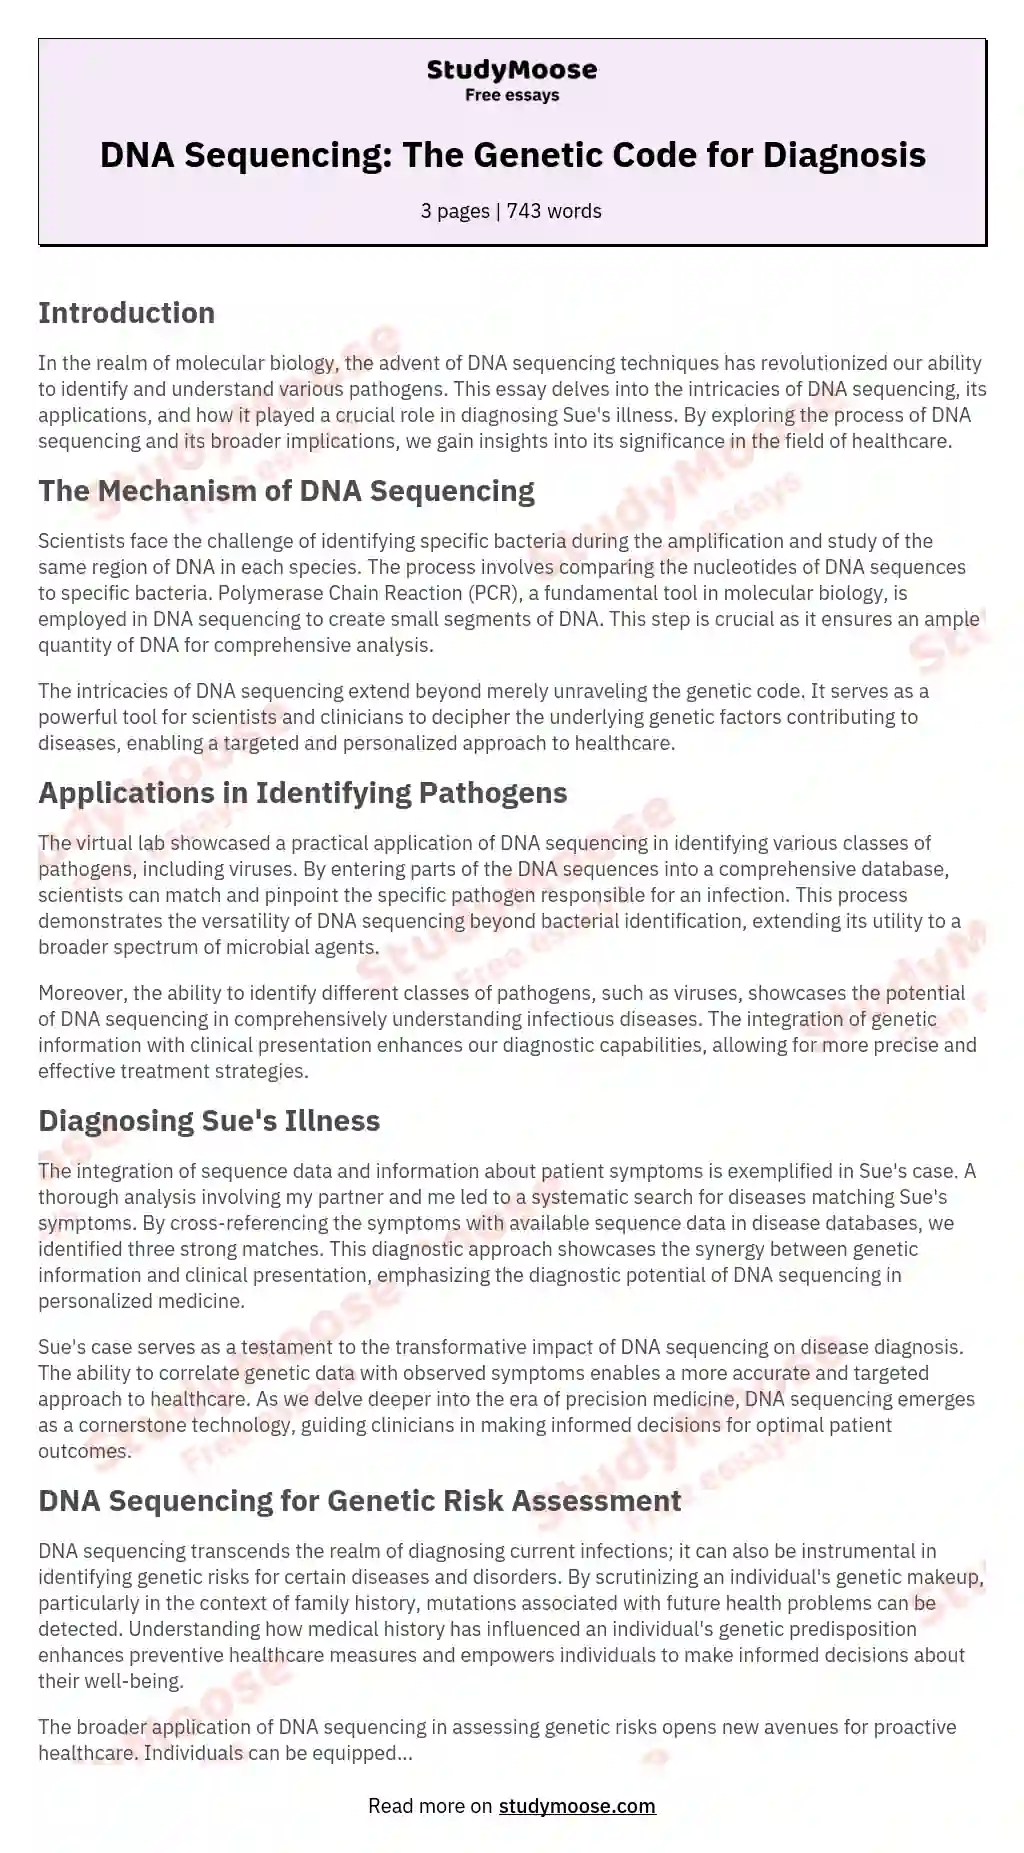 DNA Sequencing: The Genetic Code for Diagnosis essay